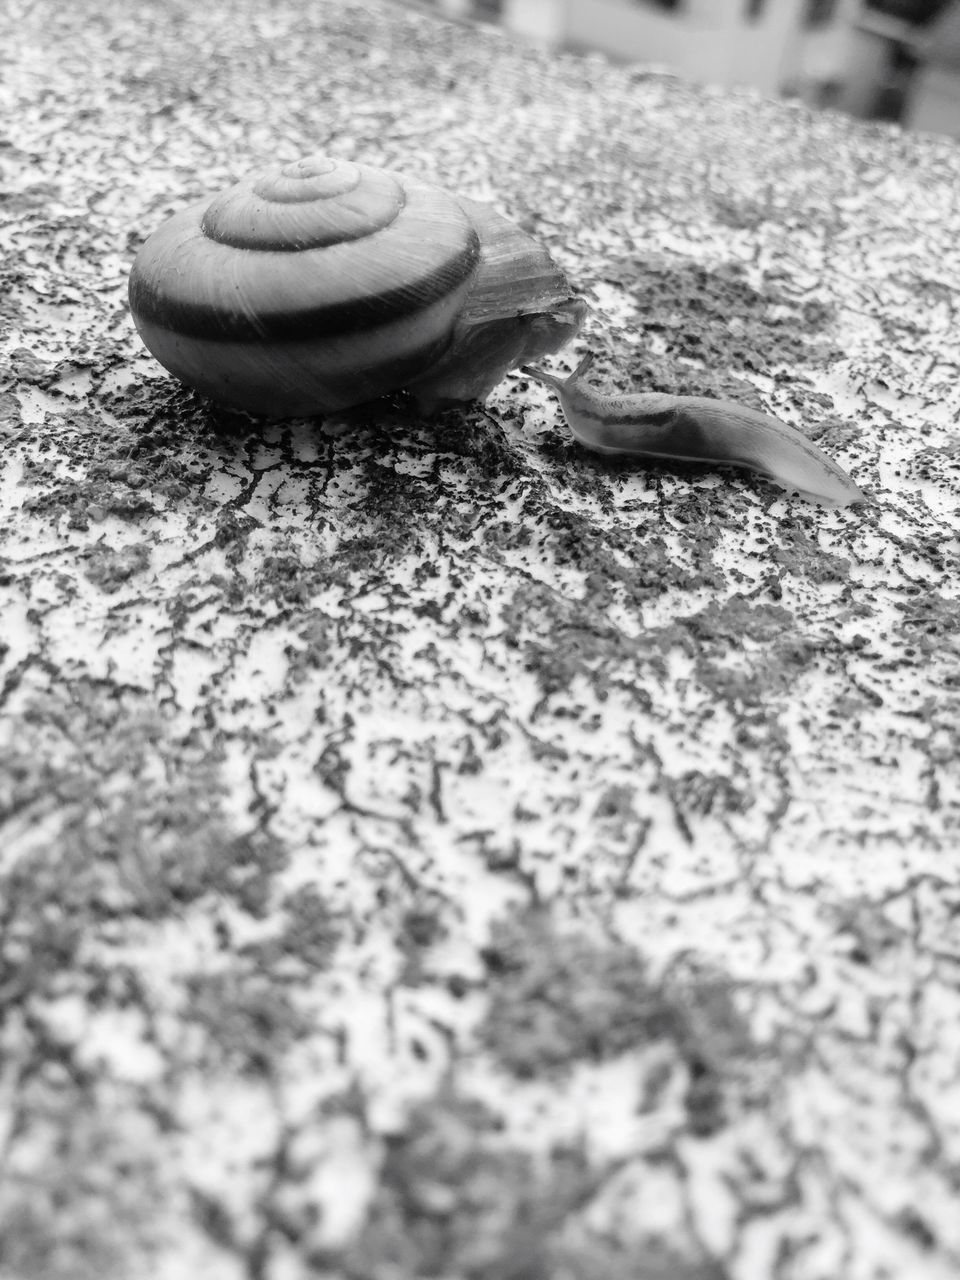 animal themes, close-up, wildlife, animals in the wild, one animal, selective focus, animal shell, focus on foreground, outdoors, high angle view, day, snail, nature, no people, reptile, sunlight, ground, rusty, shell, wood - material